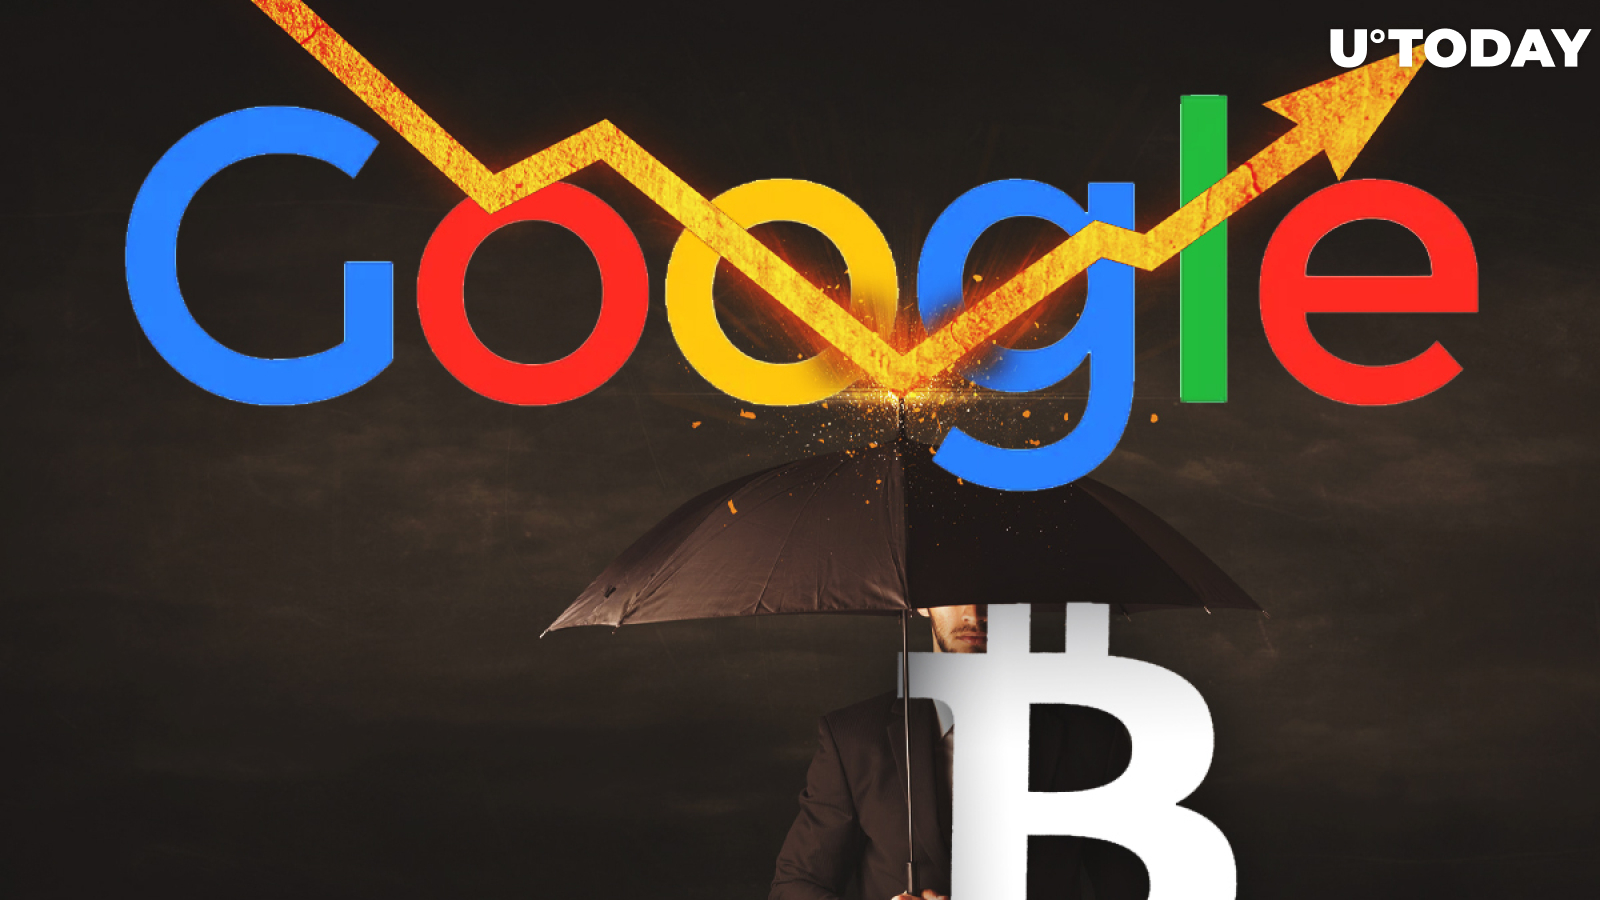 No, Bitcoin Is Not Threatened by Google's Foray into Banking